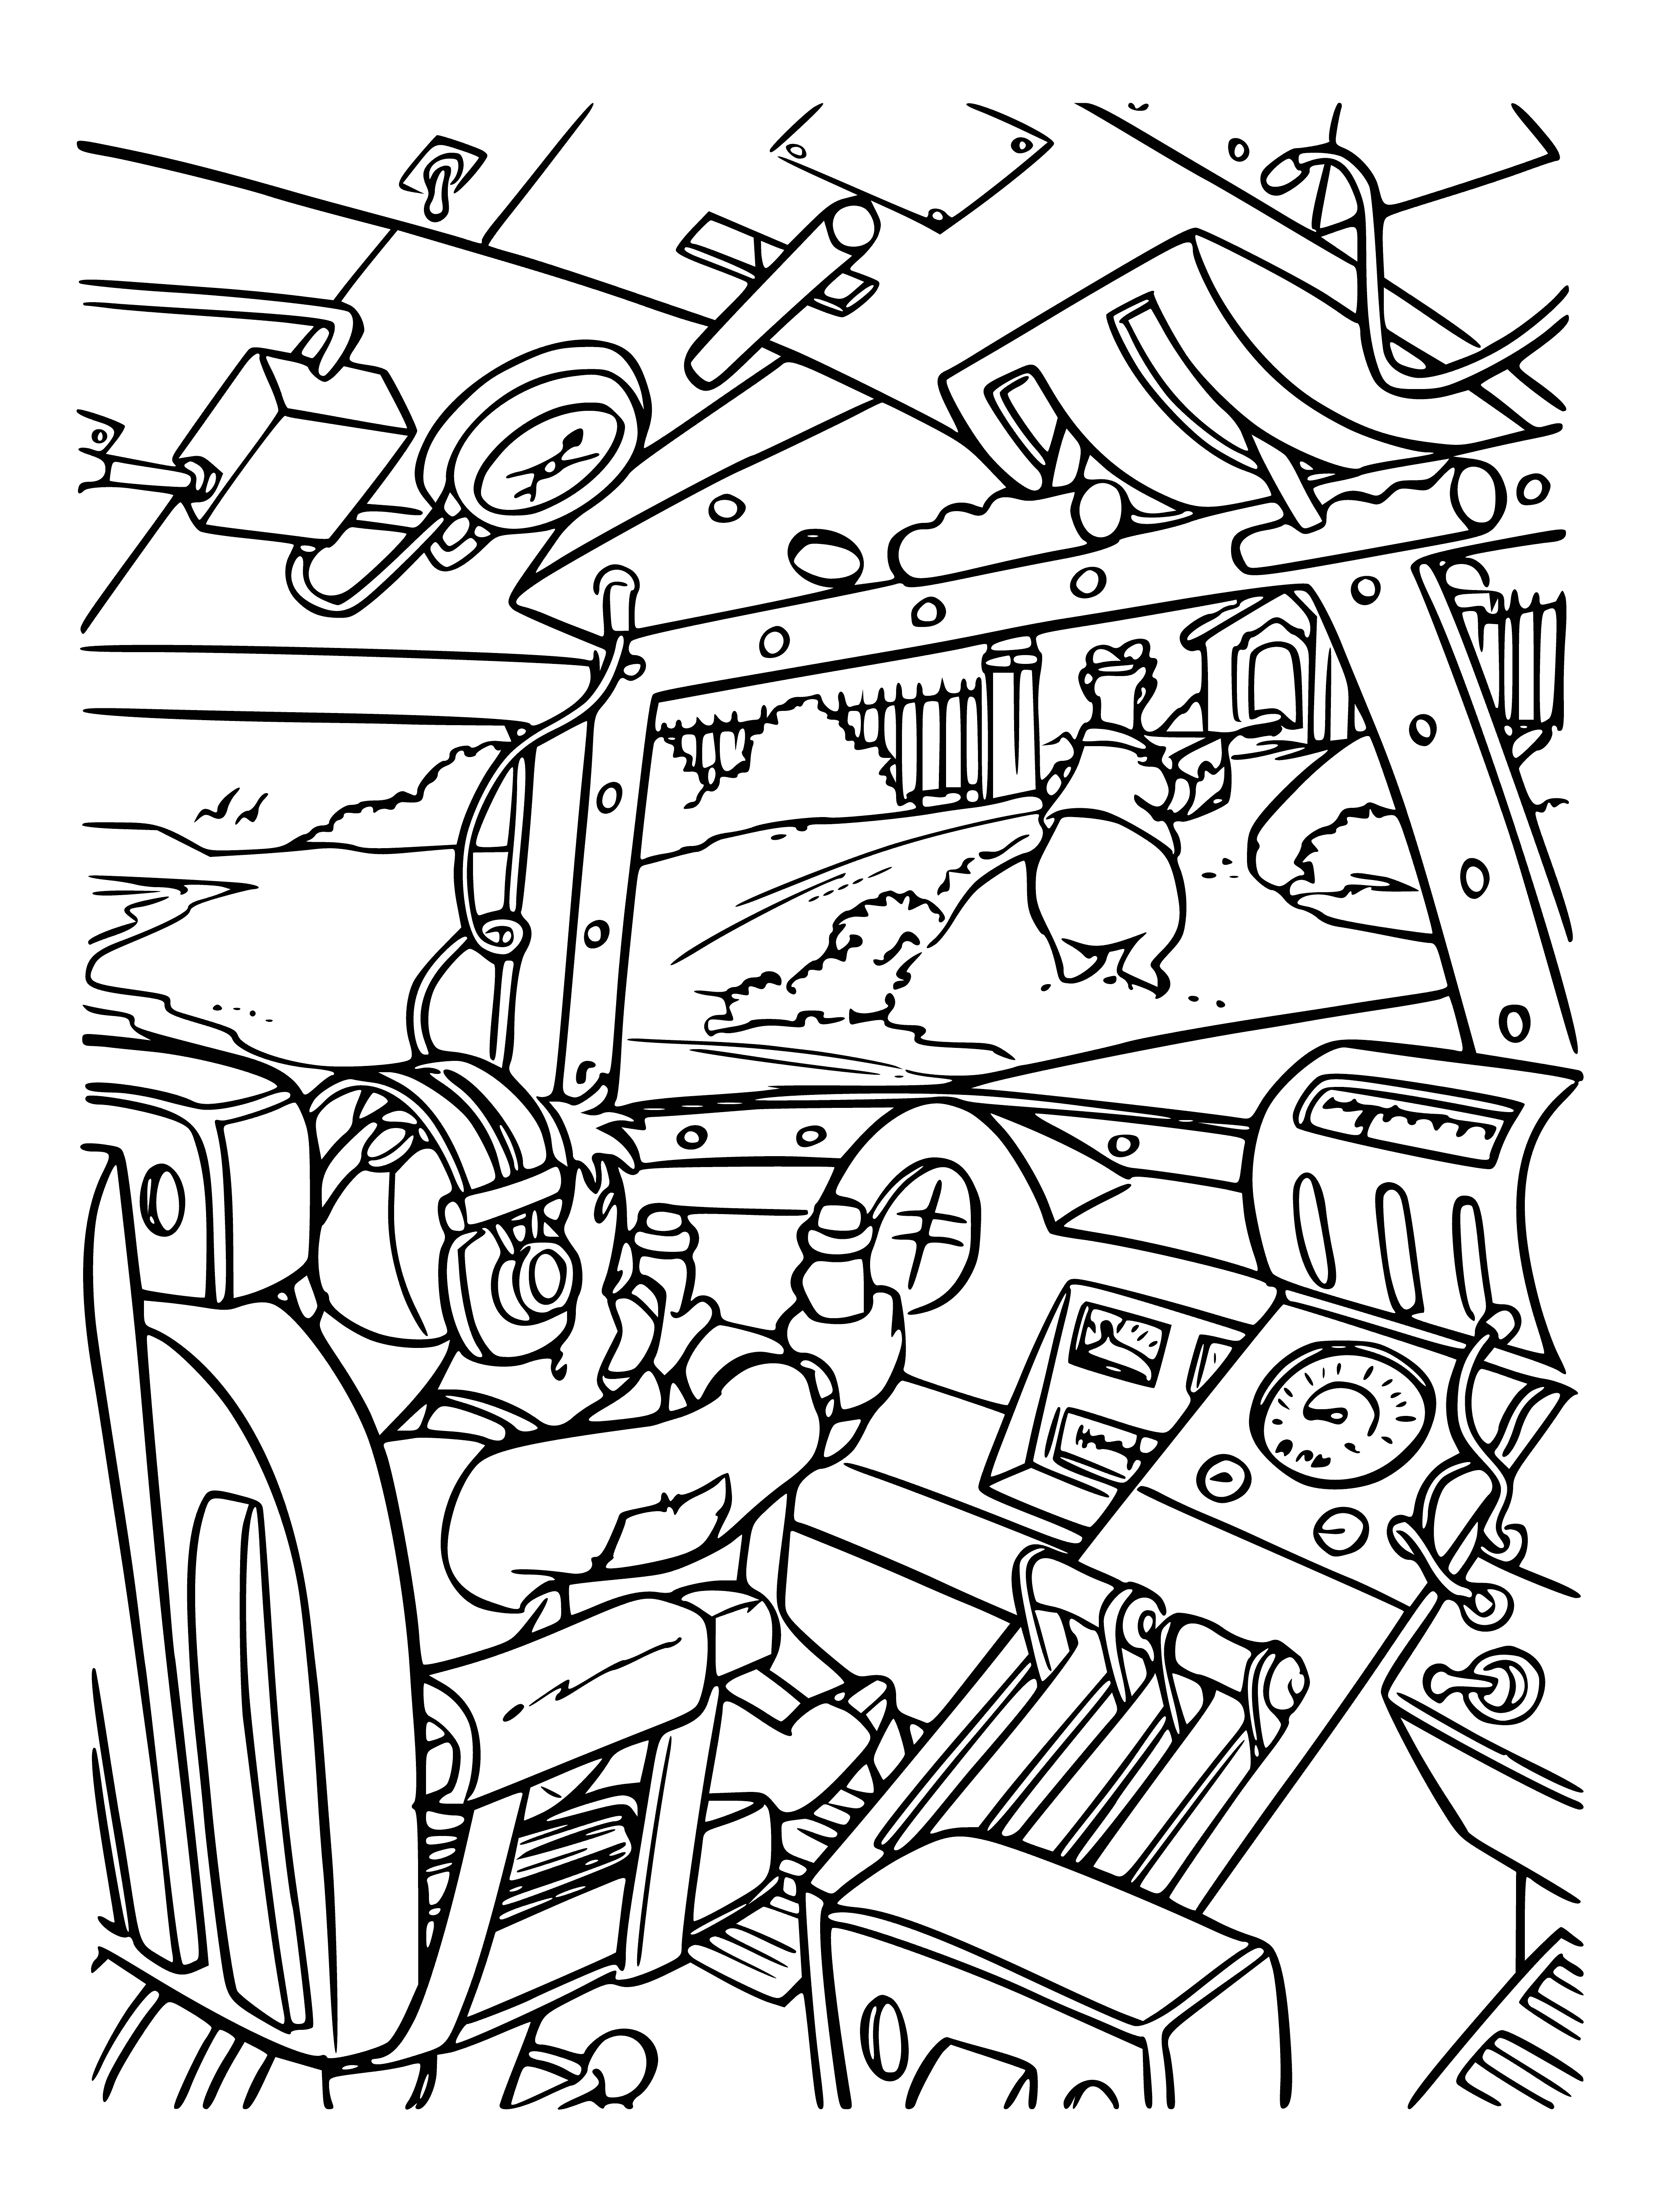 Whale at the helm coloring page